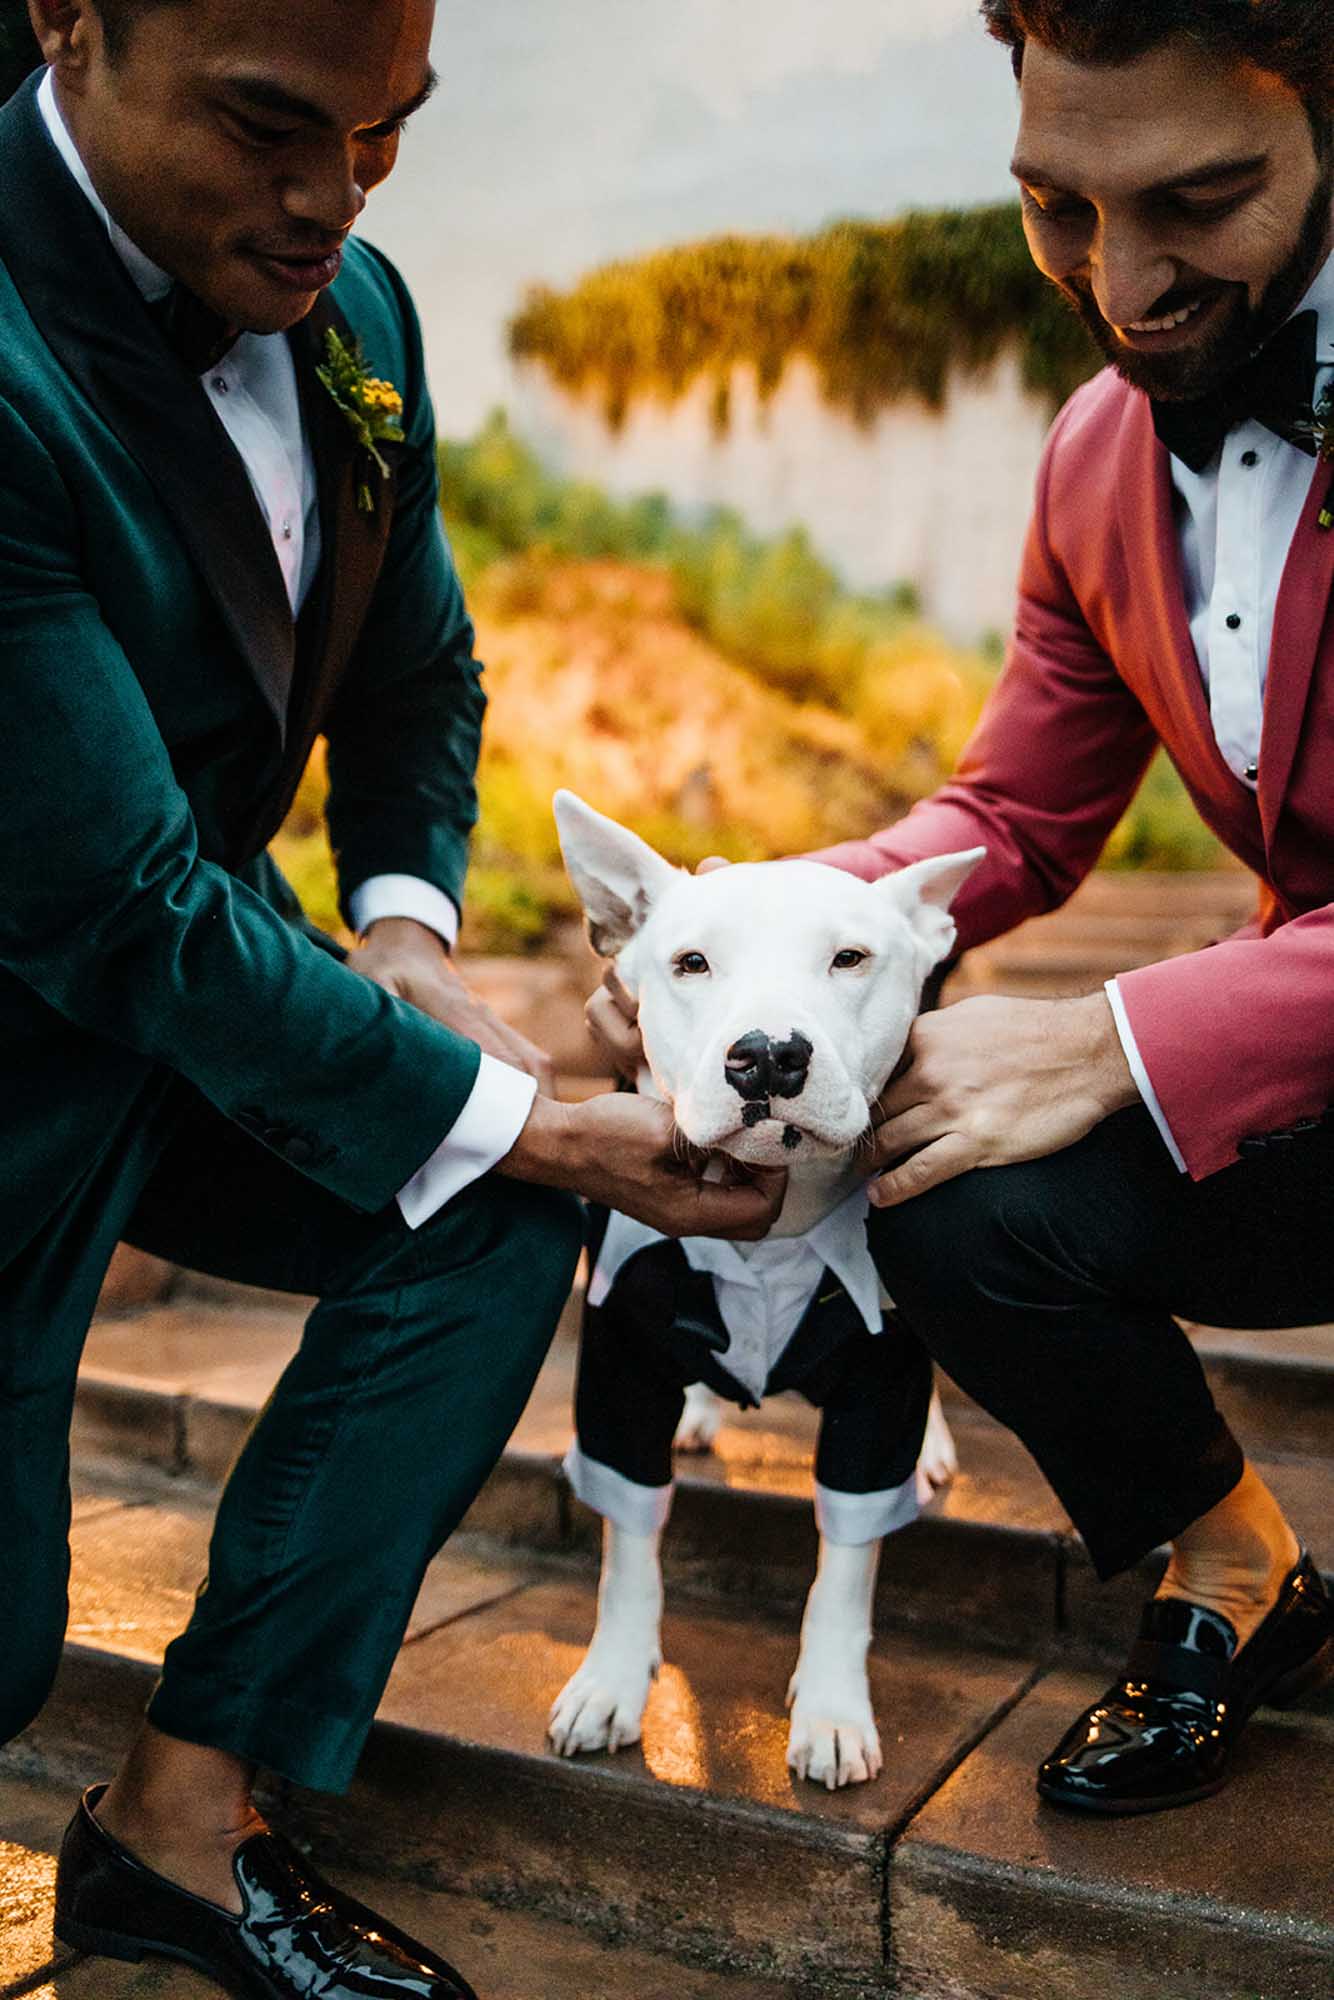 Colorful and glamorous wedding at historic Hollywood house | Erin Marton Photography | Featured on Equally Wed, the leading LGBTQ+ wedding magazine